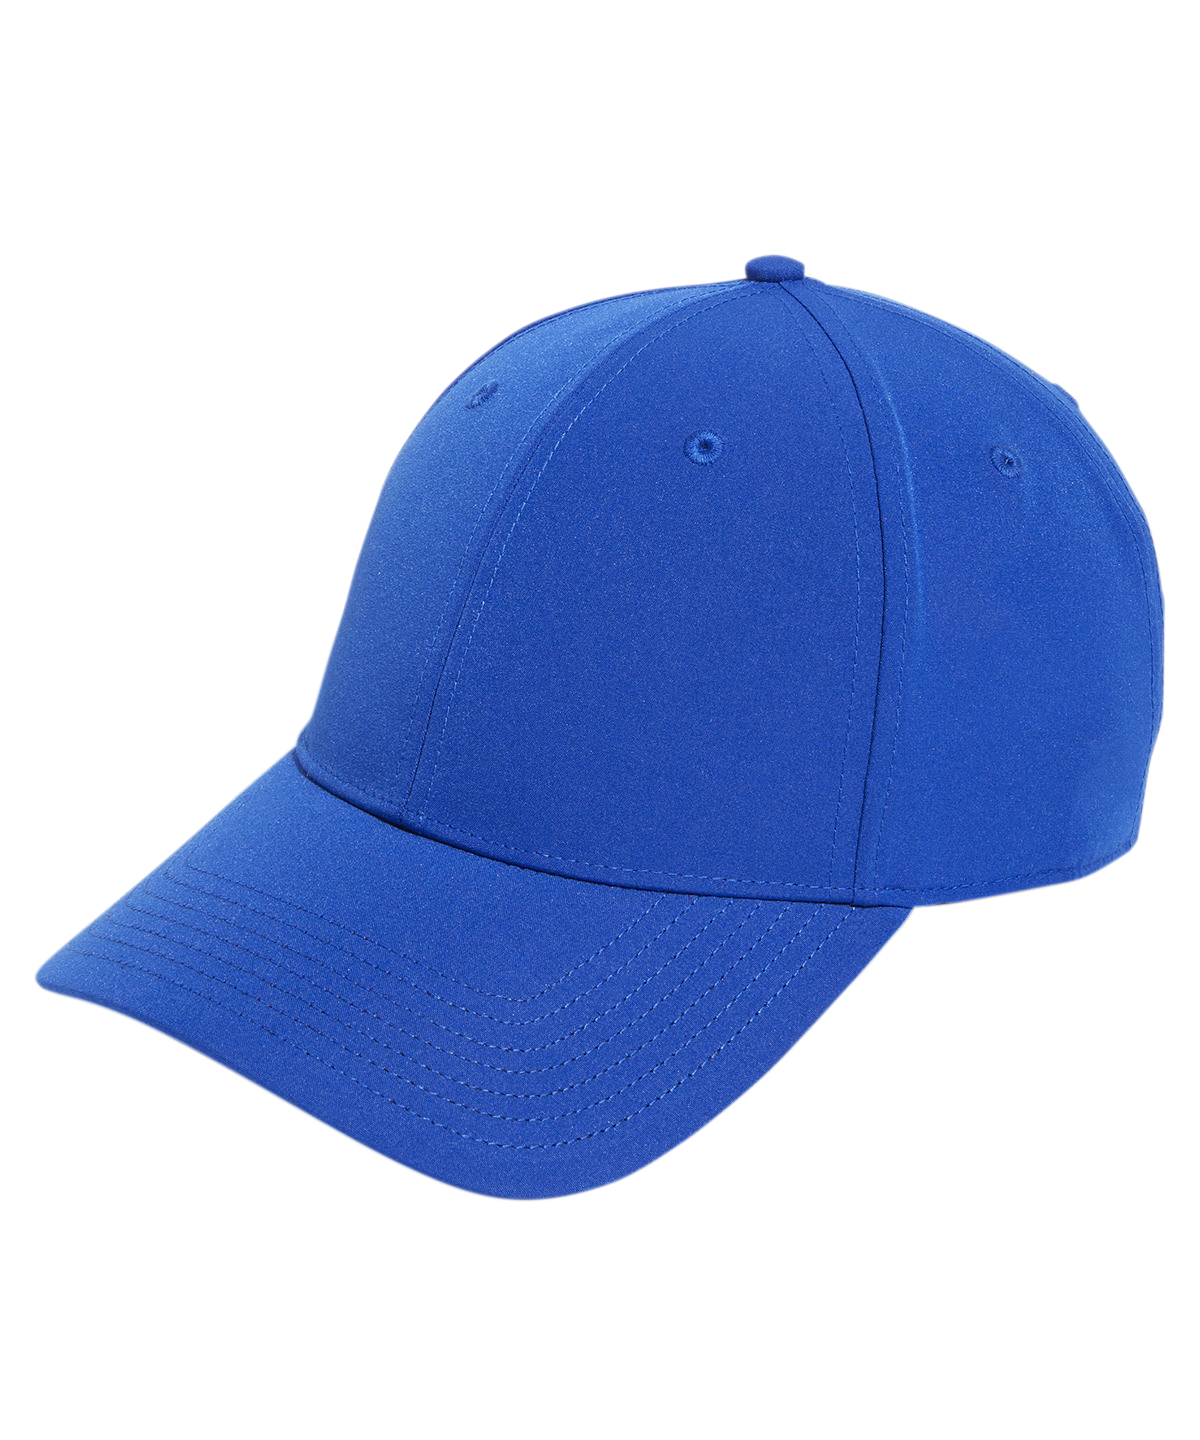 Adidas Golf Performance Crestable Cap Royal Blue Size One Size